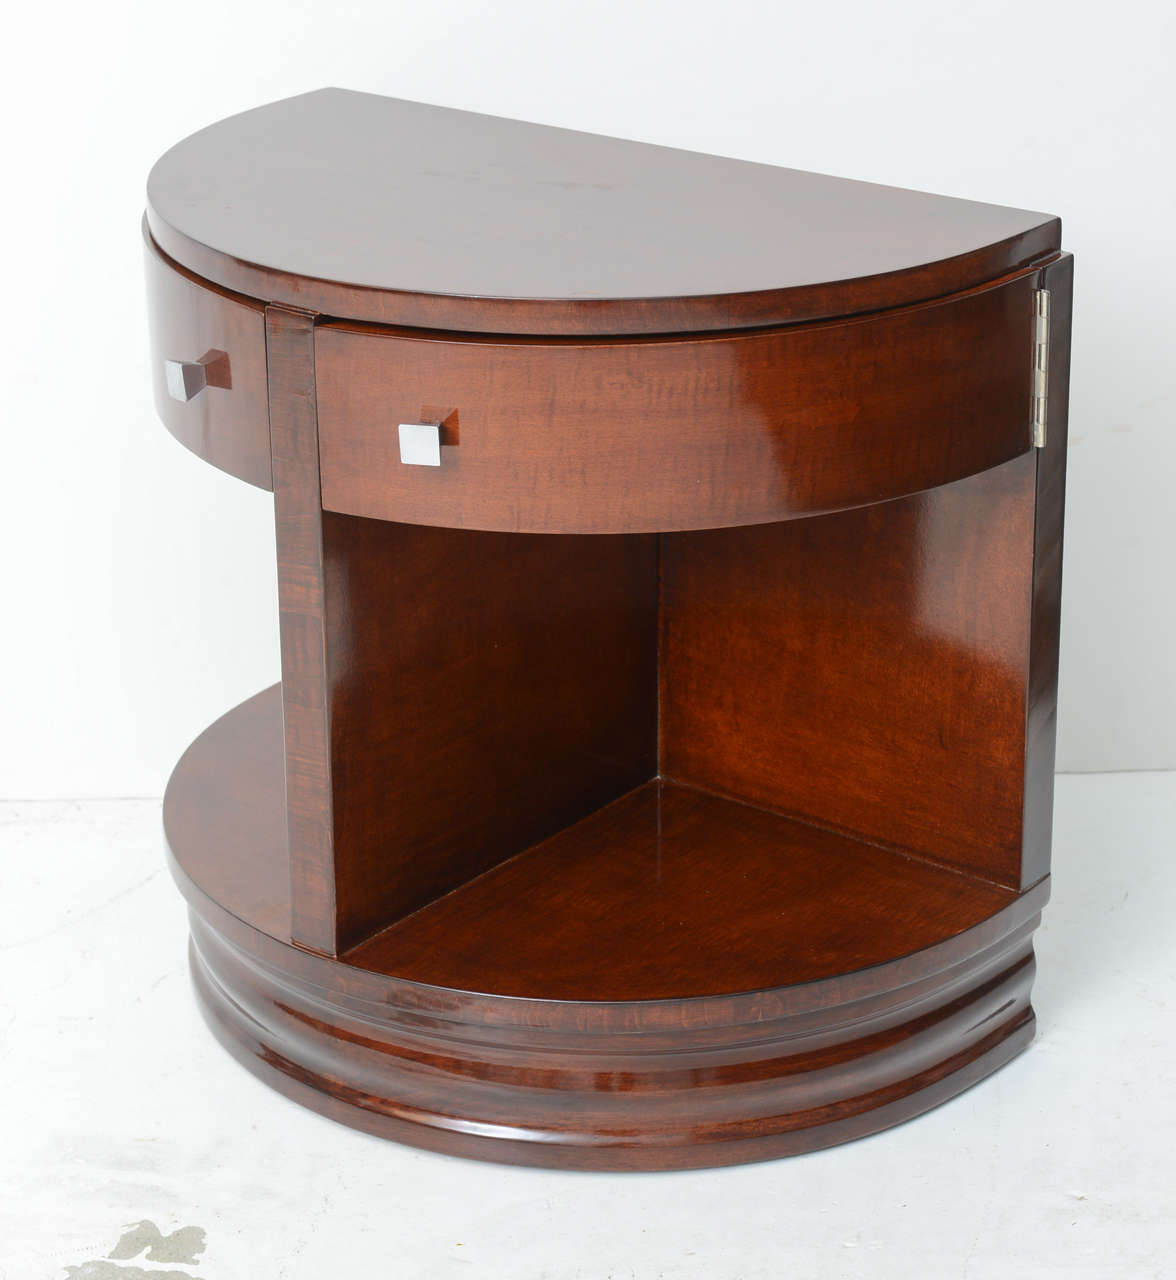 Pair of mahogany demilune side tables or nightstands. Design attributed to Donald Desky for Widdicomb.

Please feel free to contact us directly for any additional information or a shipping quote by clicking 